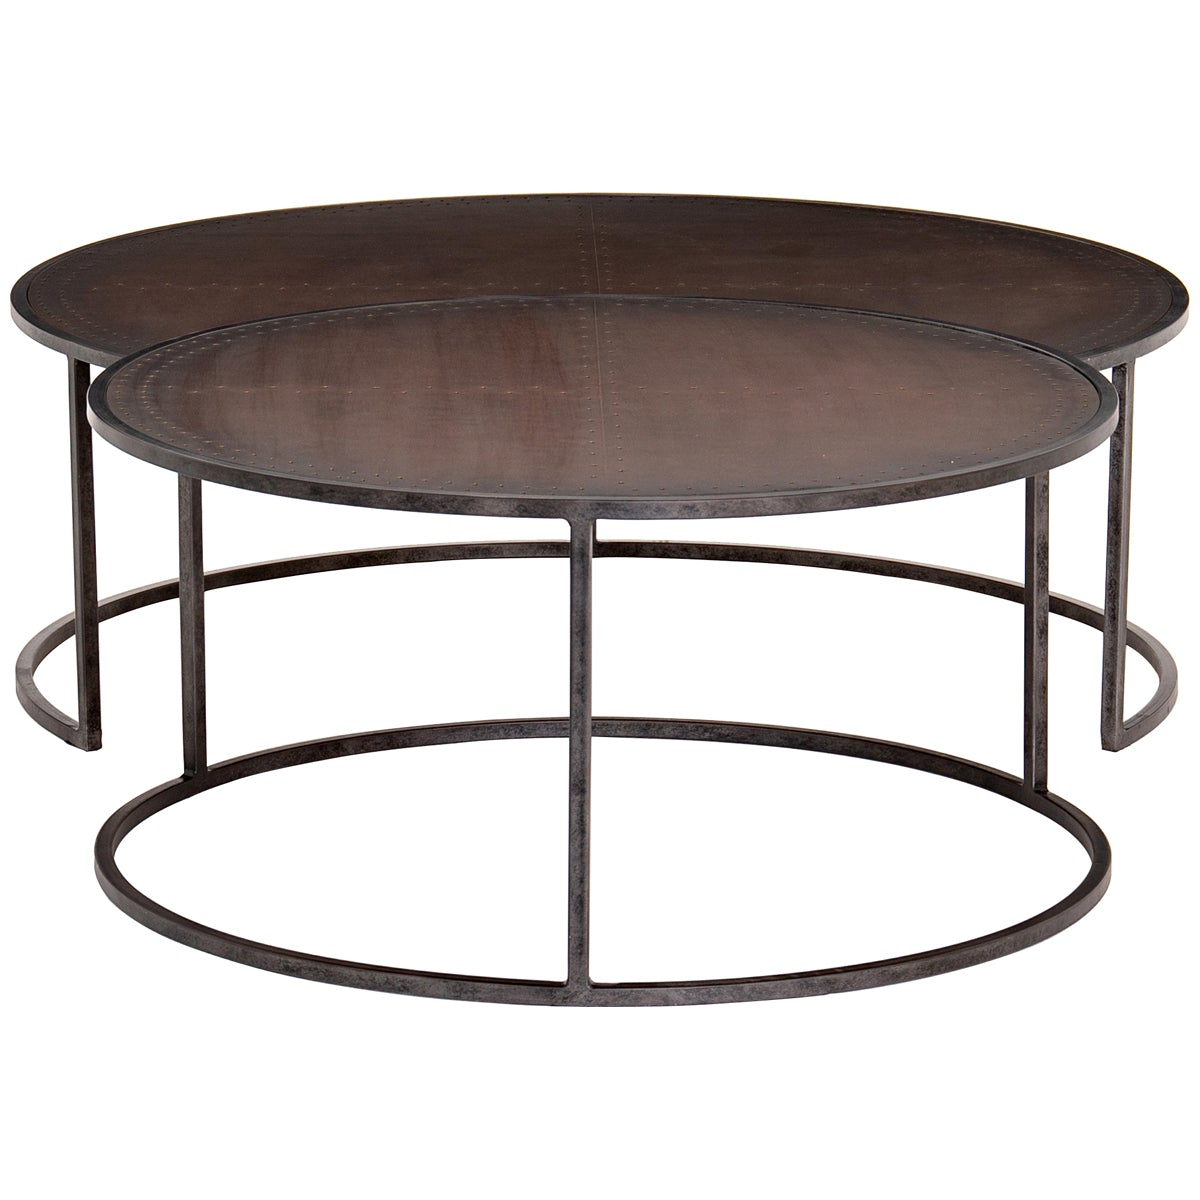 Four Hands Hughes Catalina Nesting Coffee Table - Copper Clad